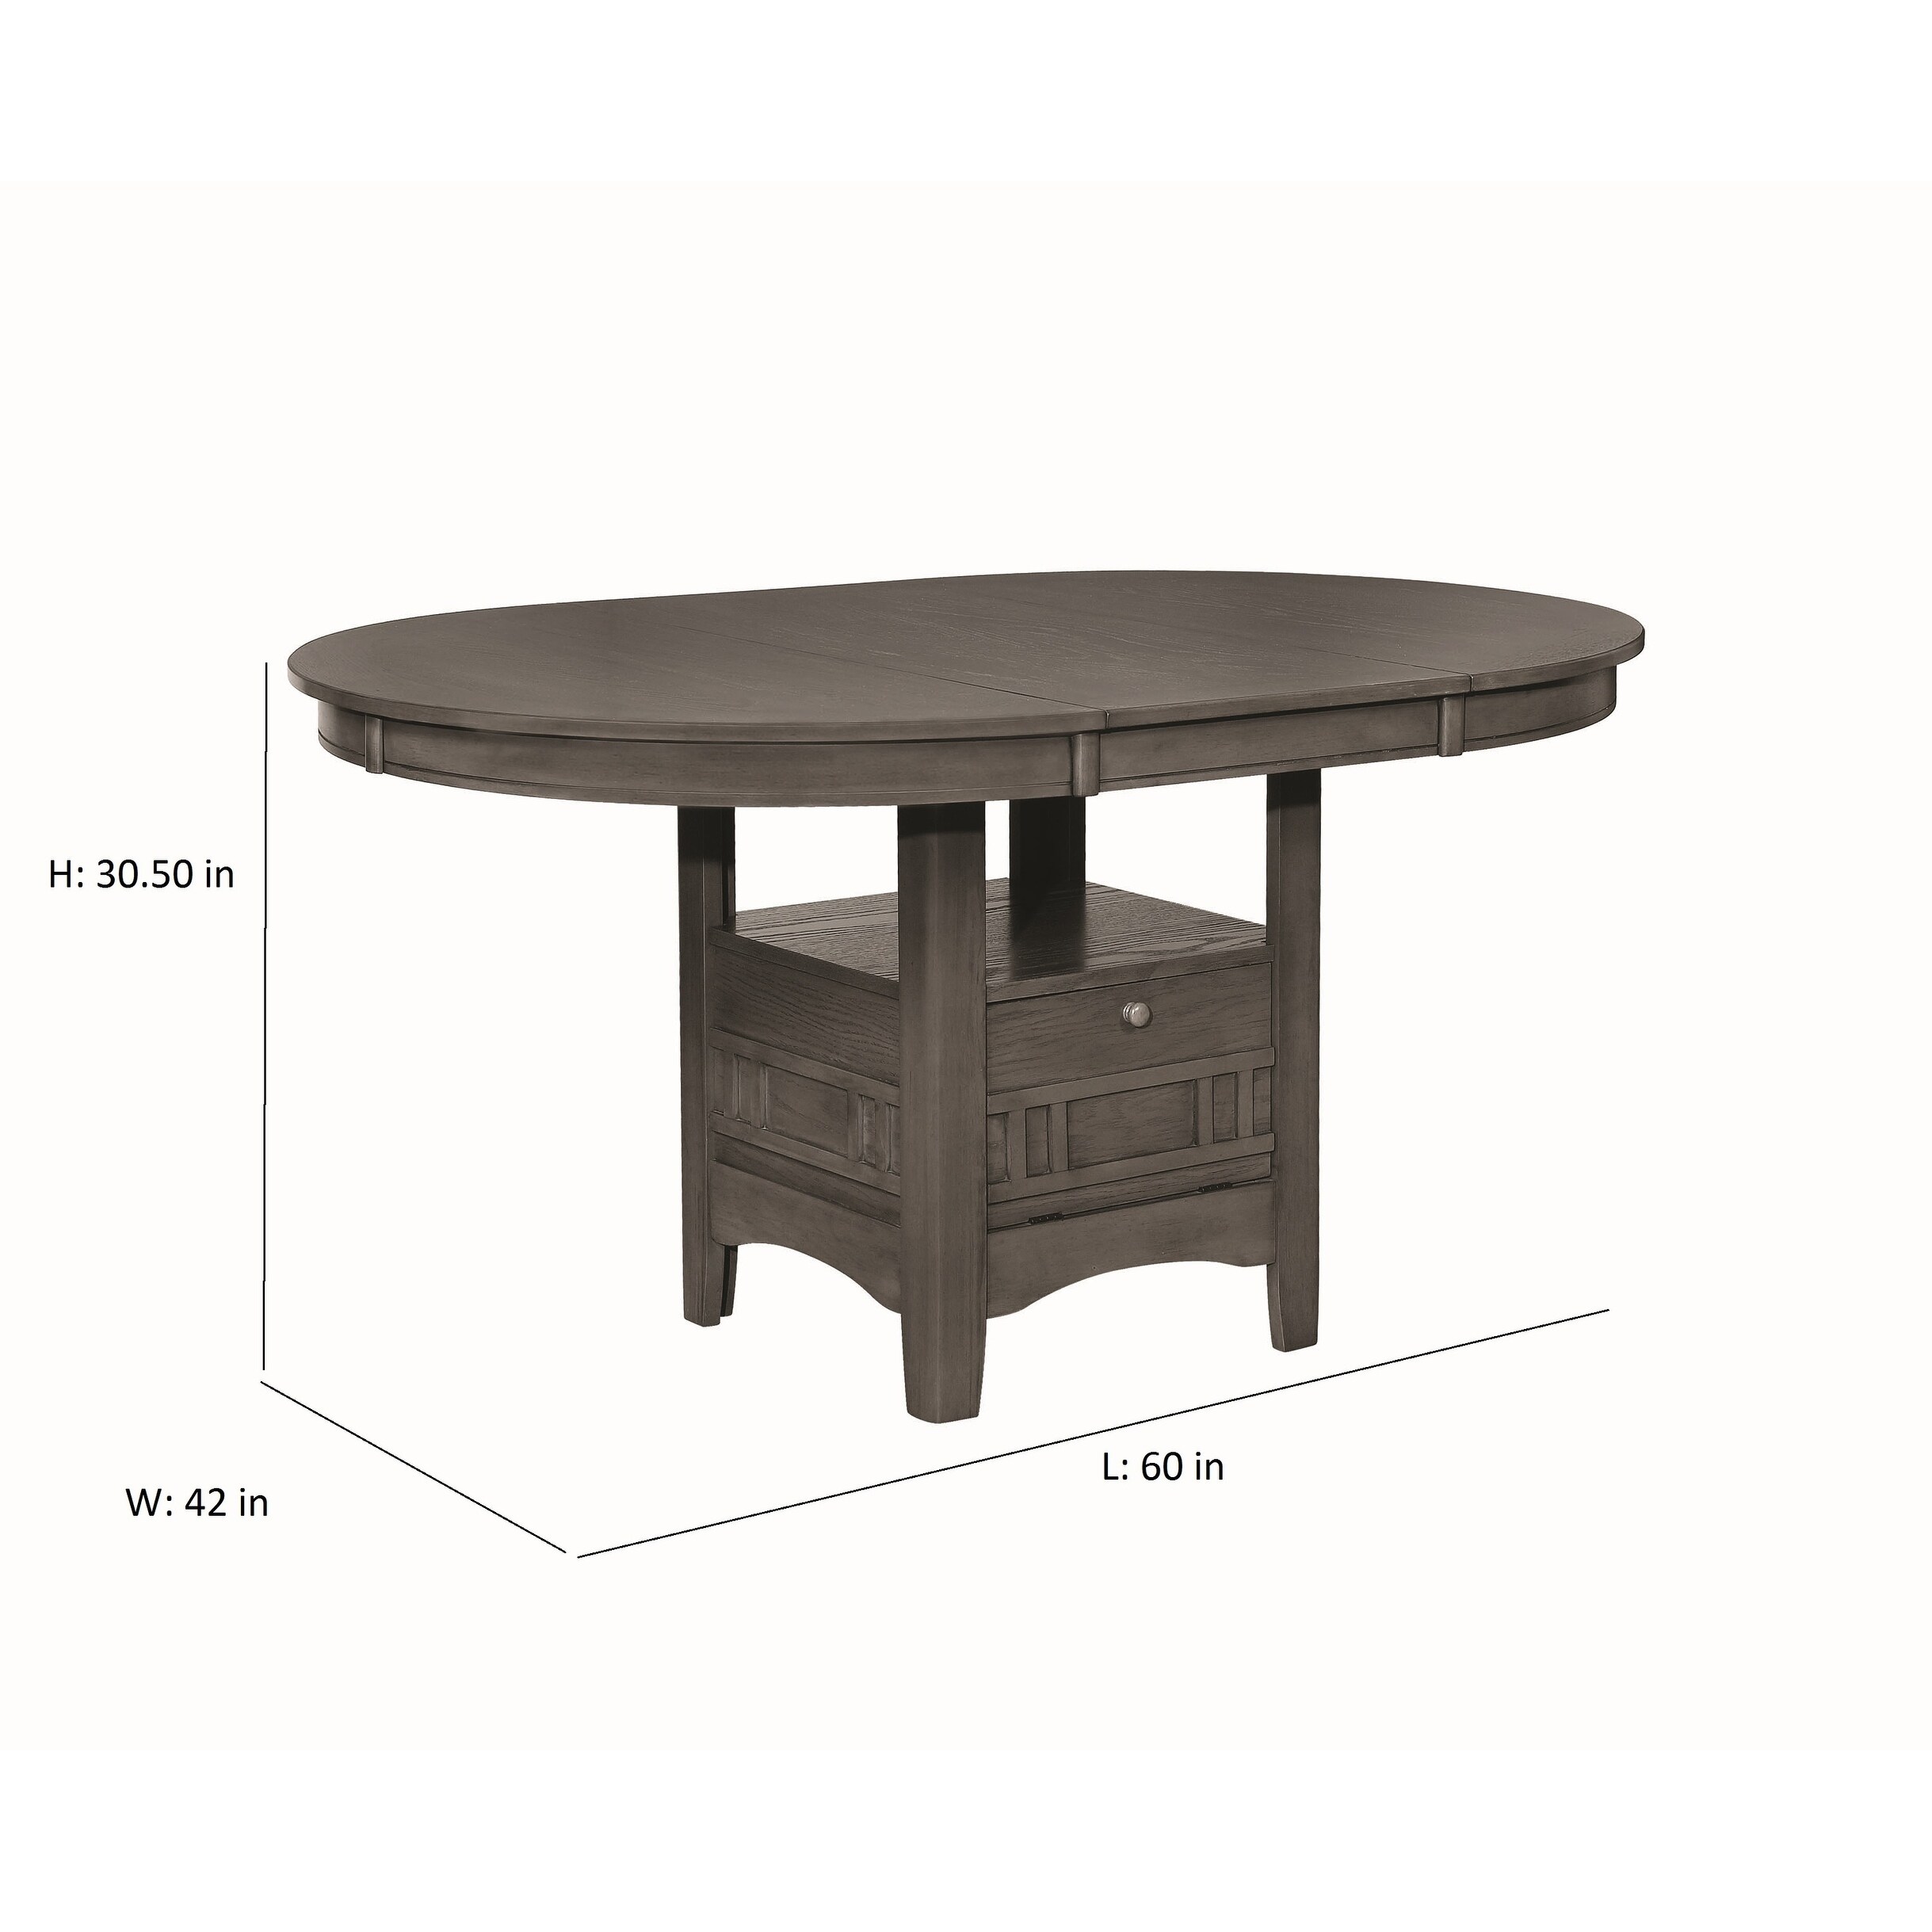 The Gray Barn Bracken Hill Medium Grey Dining Table With Extension Leaf 42 X 30 50 X 60 Overstock 28108930